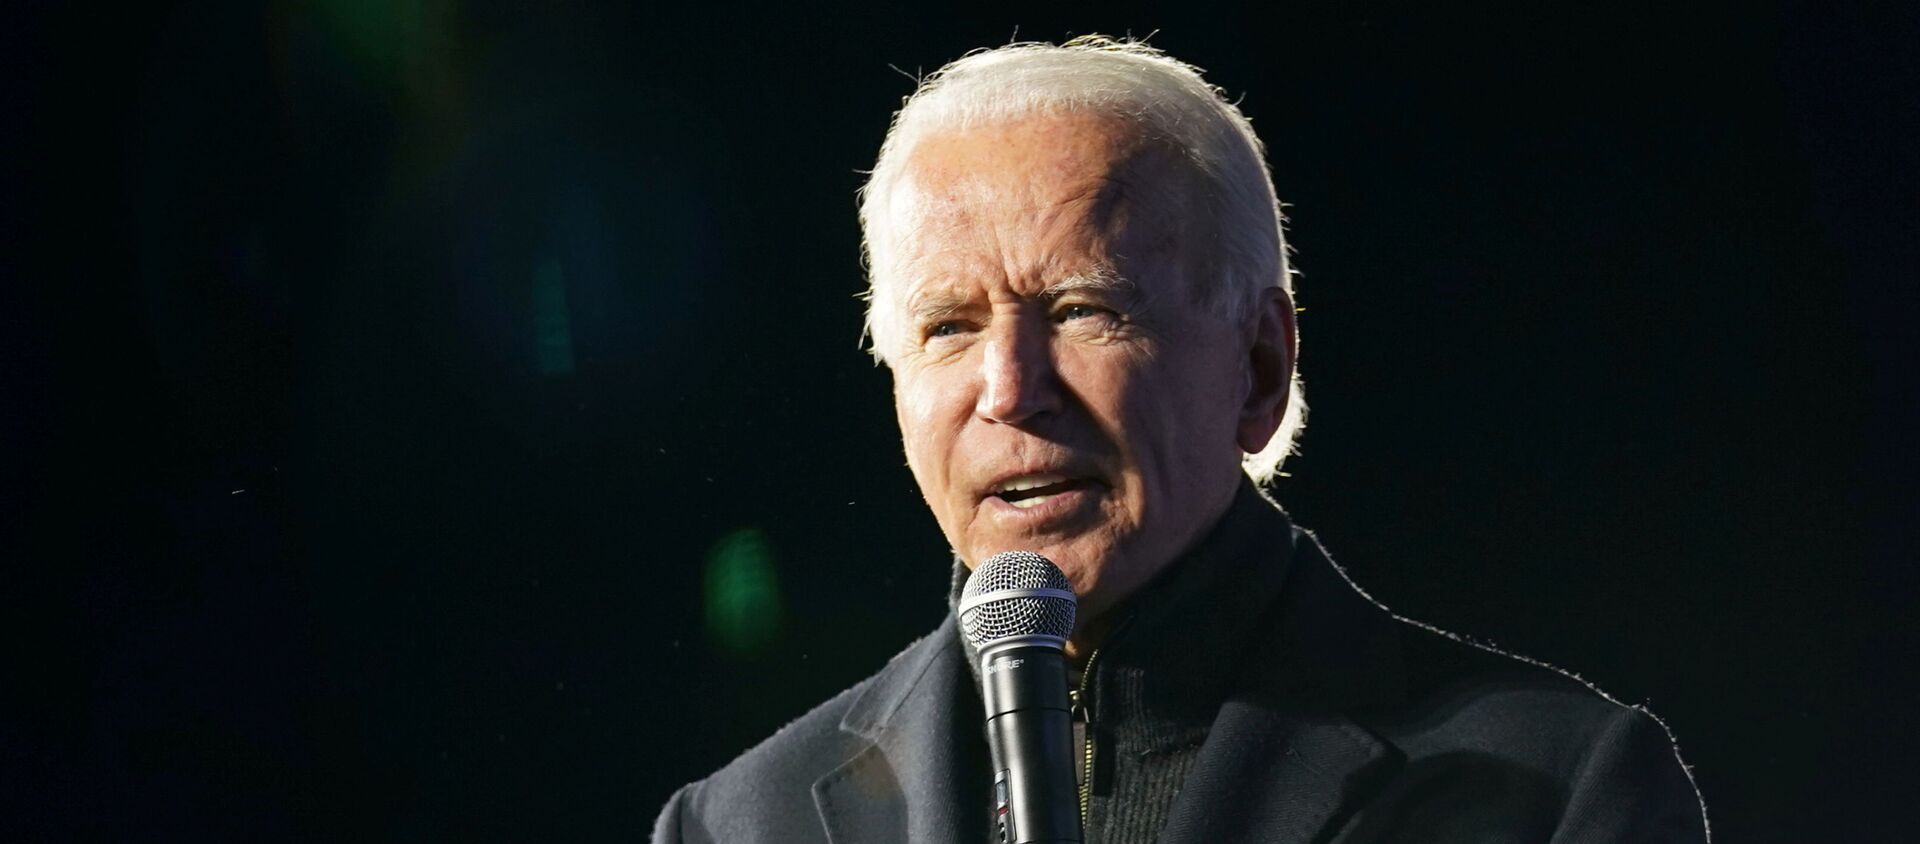 Democratic U.S. presidential nominee and former Vice President Joe Biden speaks during a drive-in campaign rally at Lexington Technology Park in Pittsburgh, Pennsylvania, U.S., November 2, 2020 - 俄羅斯衛星通訊社, 1920, 04.11.2020